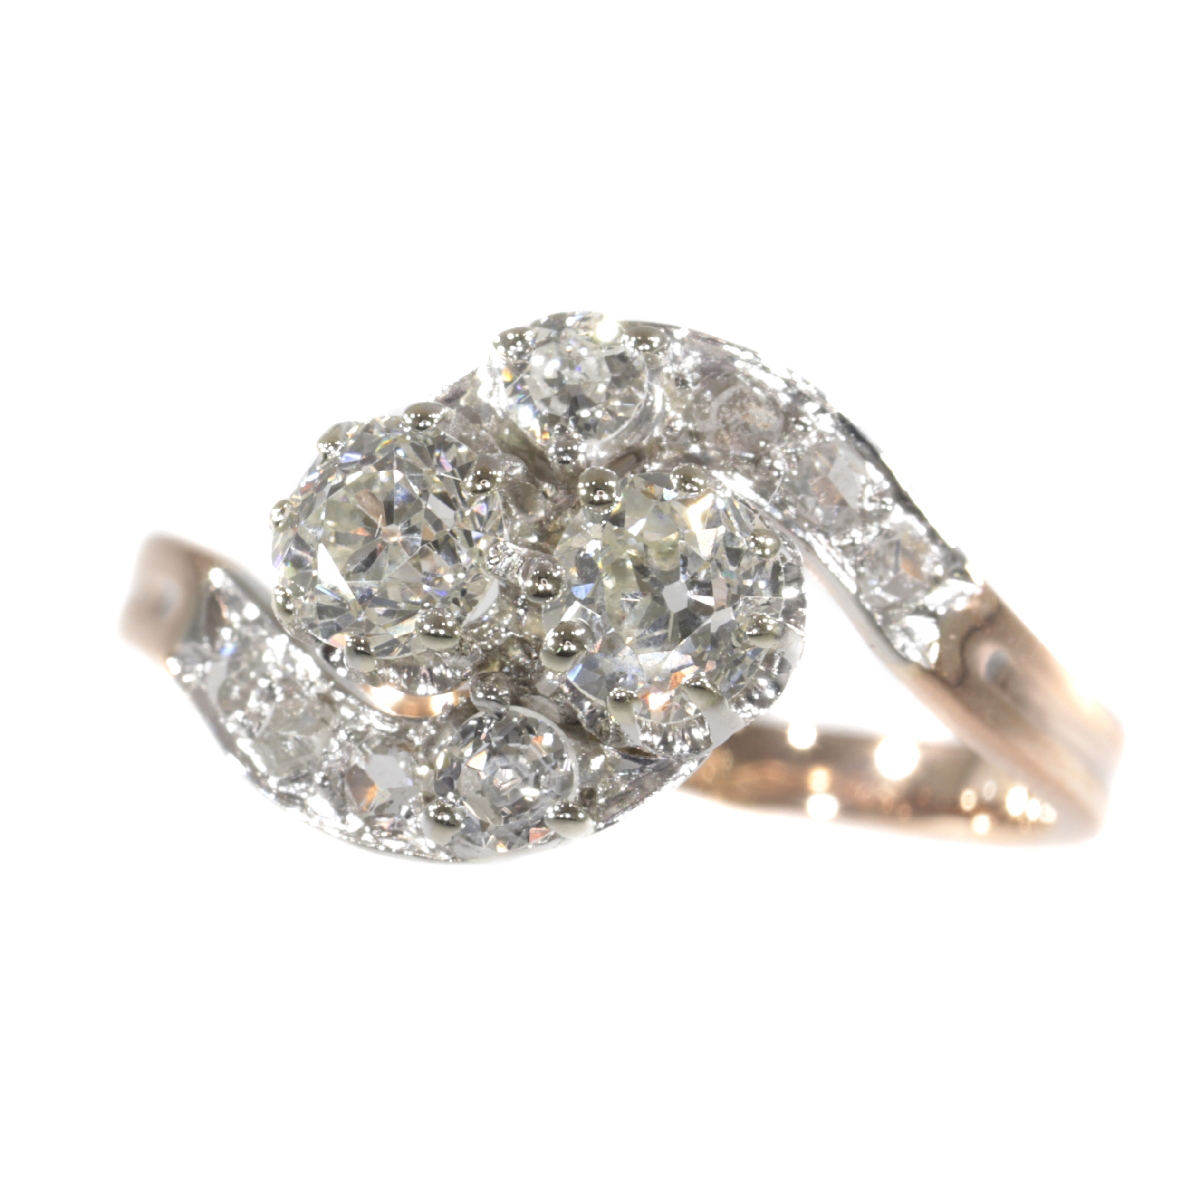 Belle Epoque romantic diamond toi et moi engagement ring - French for you and me